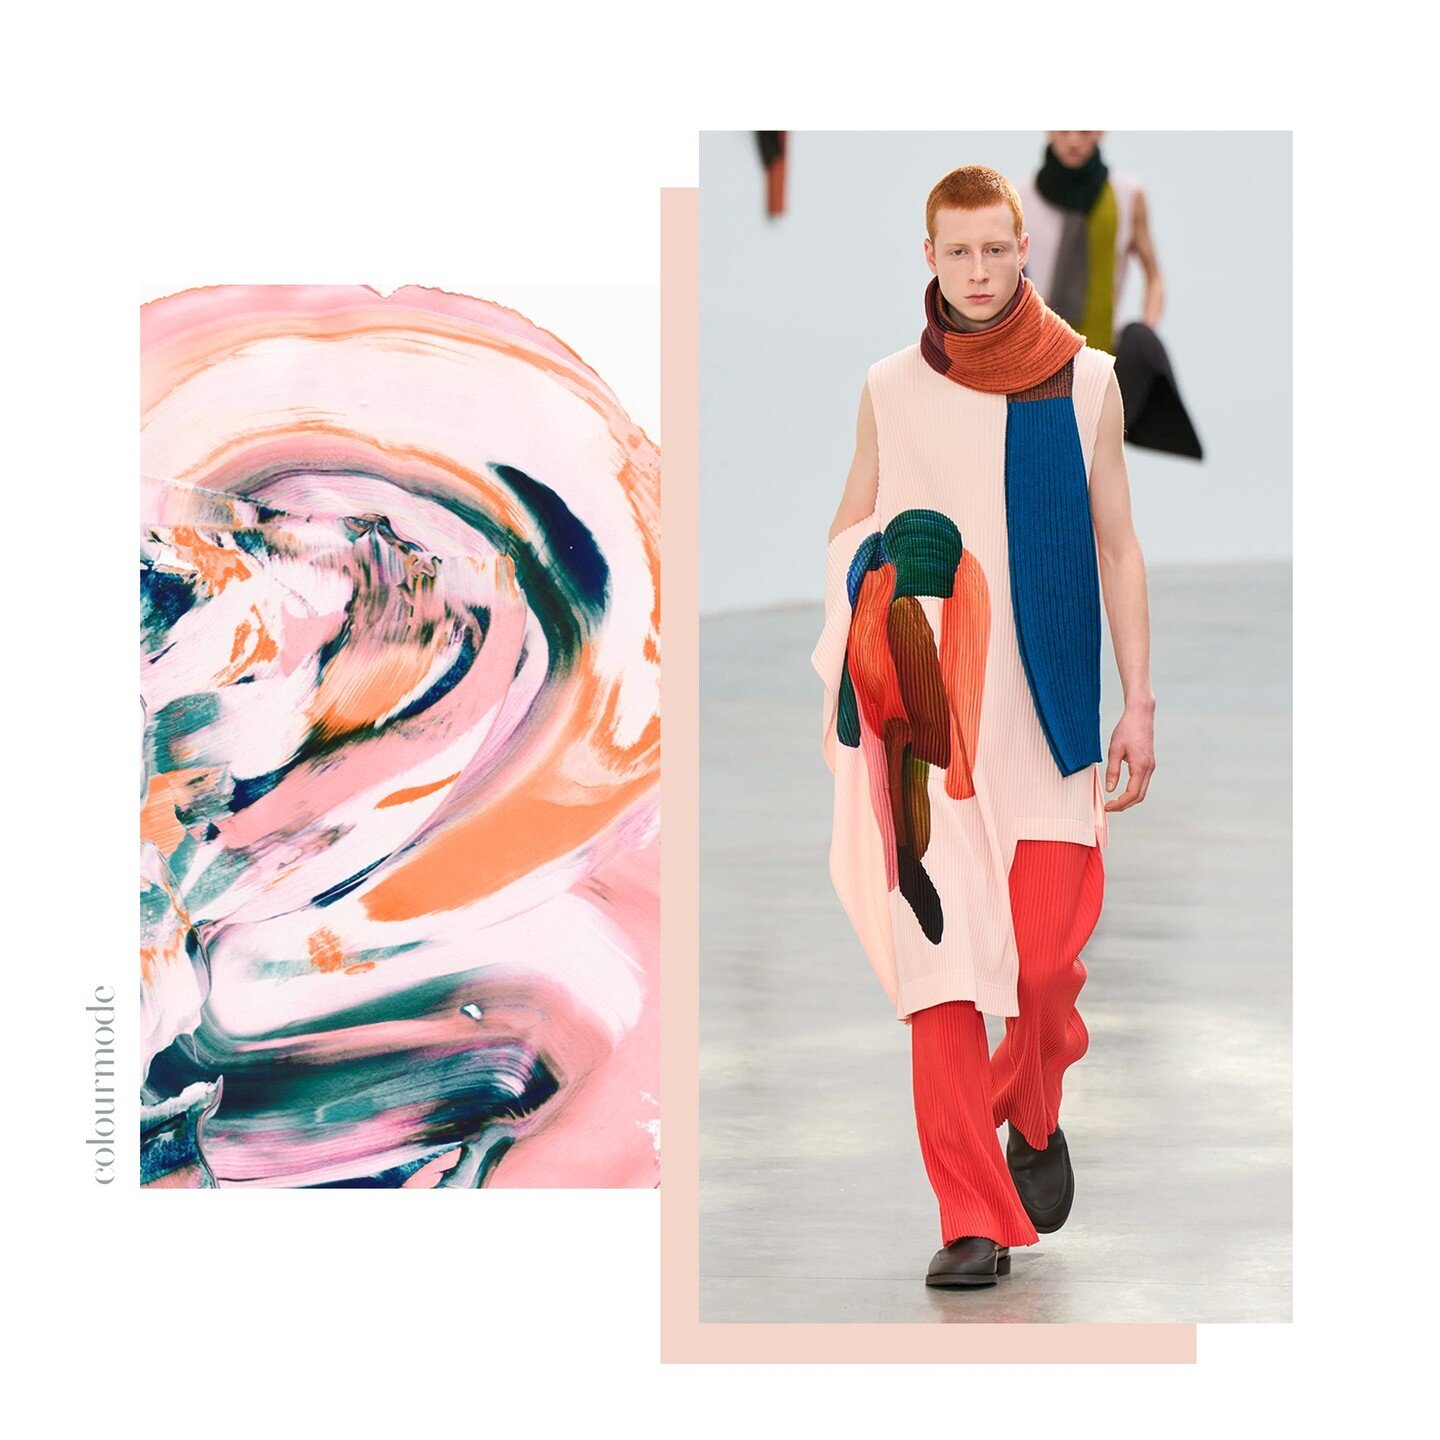 Mood ~ Art in Fashion

Expressive Abstracts, Sophisticated Brushmarks and Wearable Art continues to be popular in both Womenswear and Menswear catwalk collections... are you loving this trend as much as we are!

.
.
.

#colourmode #printstudio #artin